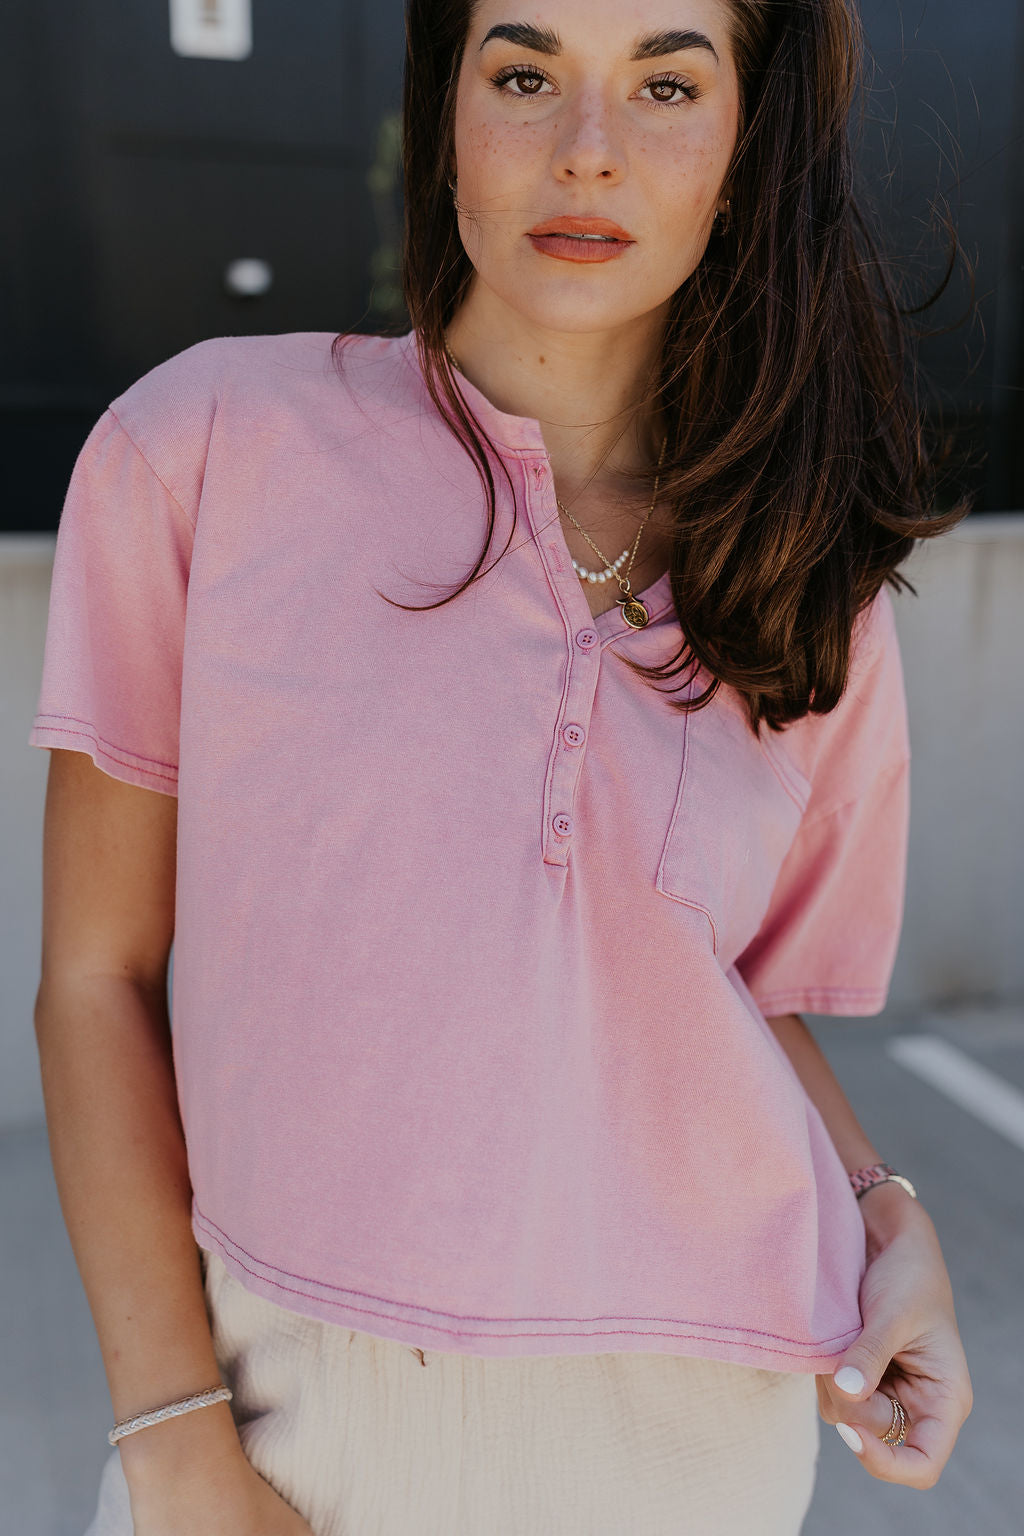 Close Front view of model wearing the Elise Pink Cropped Short Sleeve Tee that has pink knit fabric, a button up neckline, a chest pocket, and short sleeves.